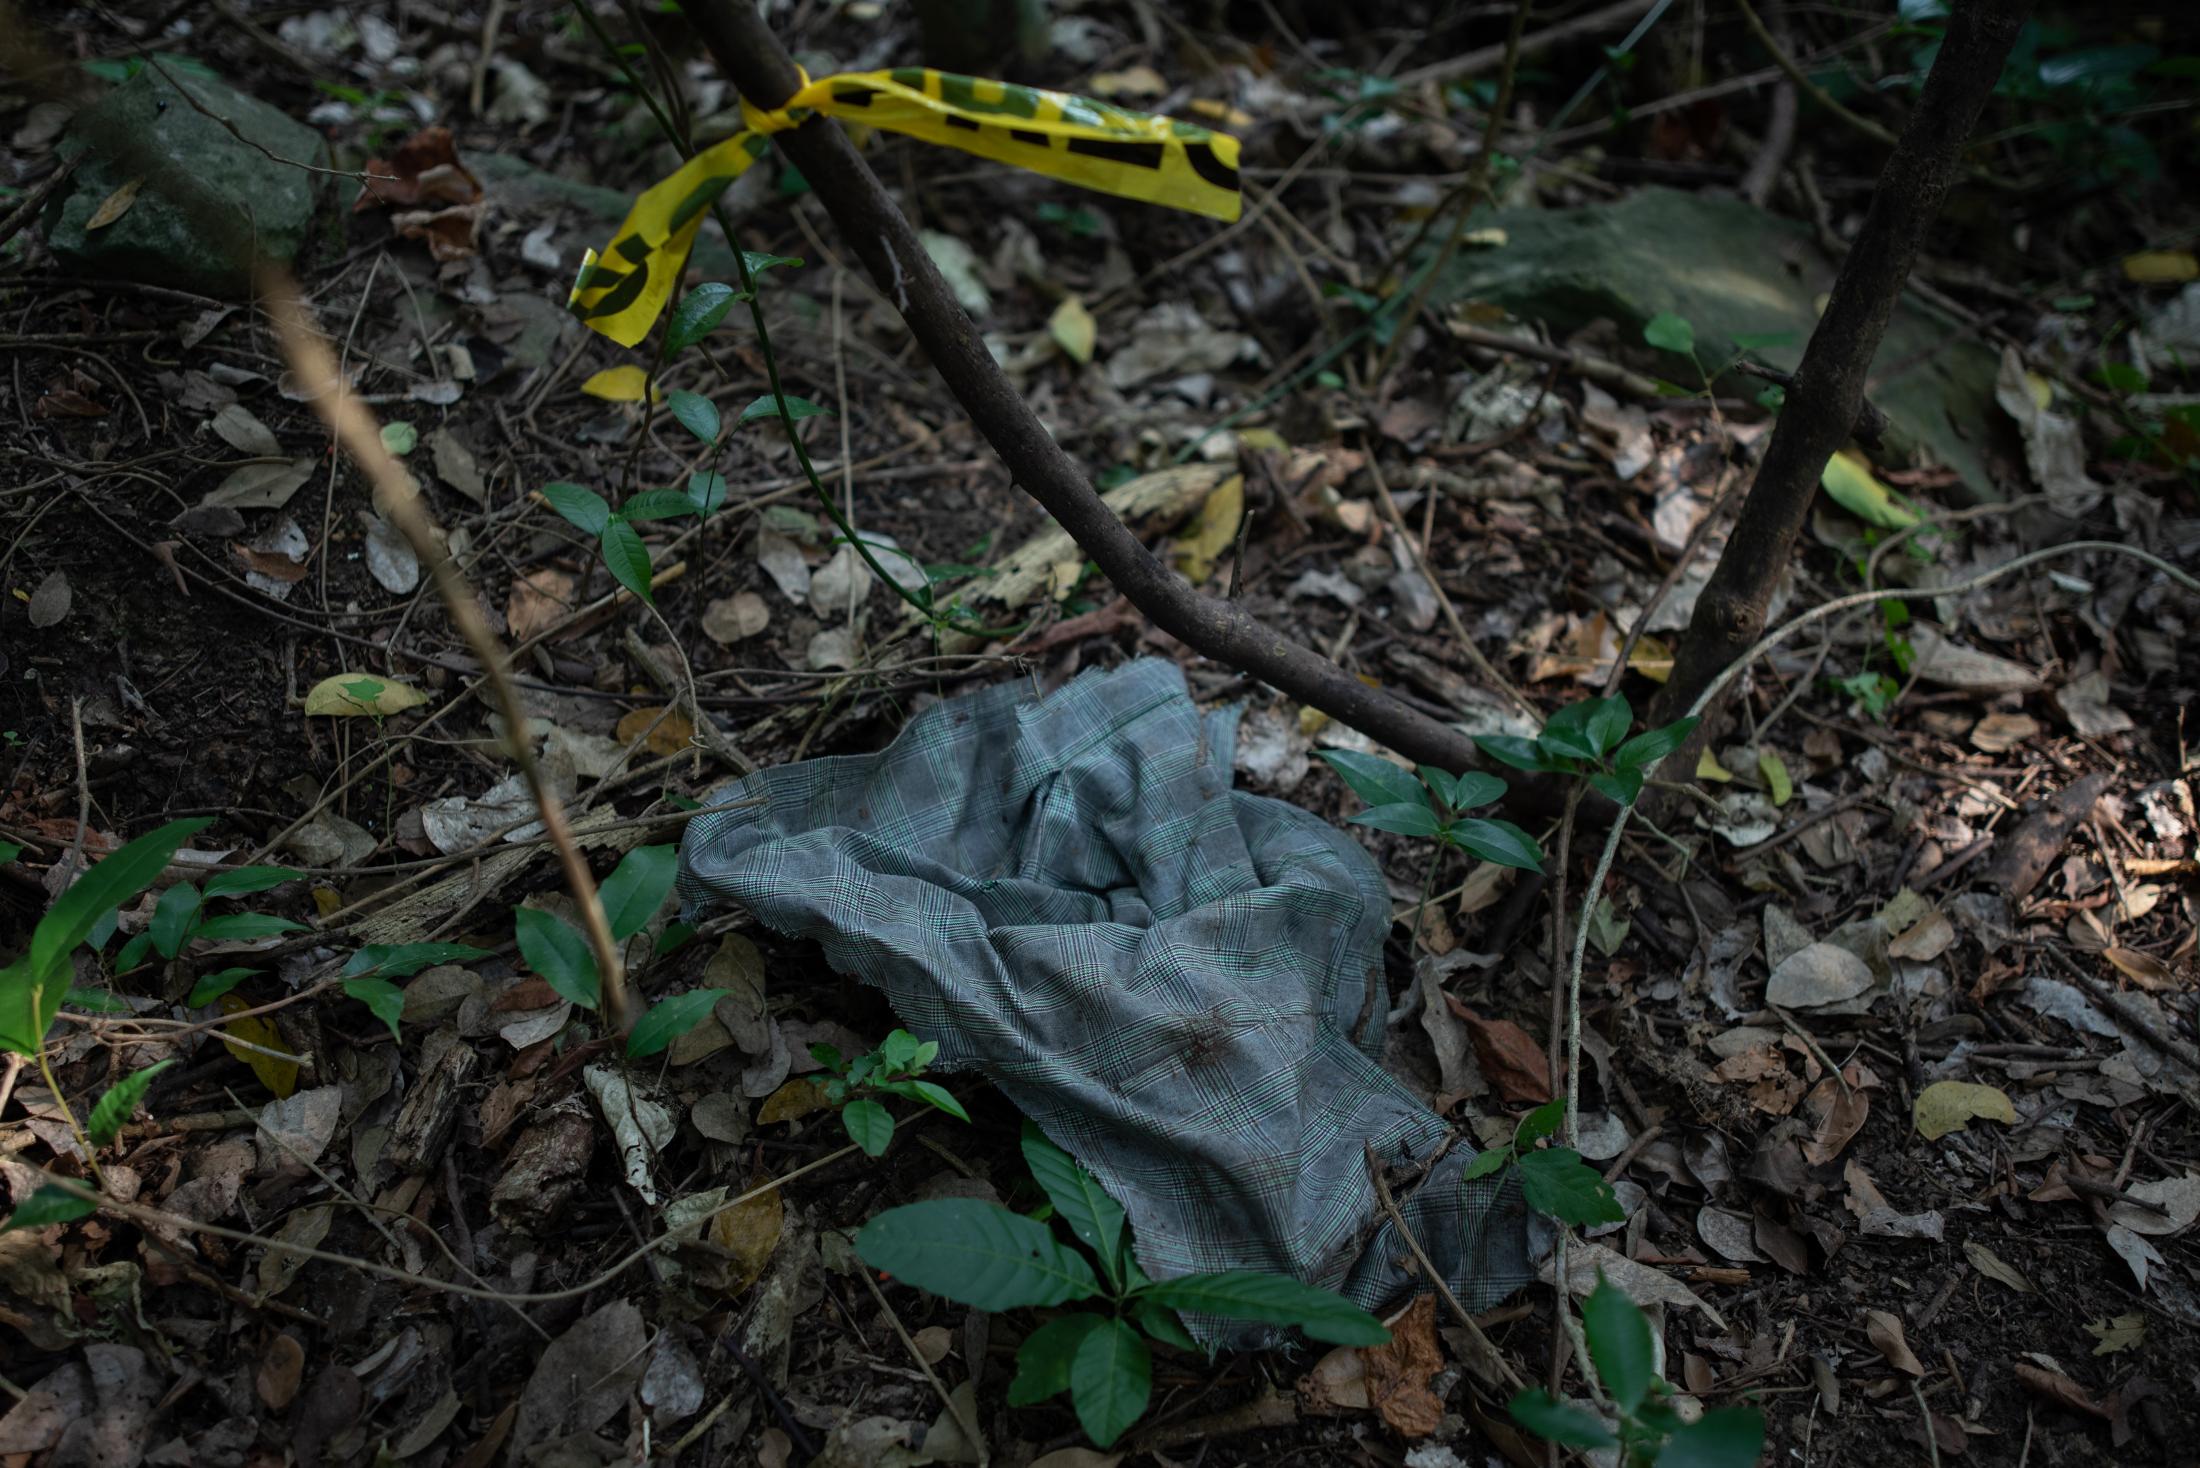 Women&#39;s skirt is located in an area that is investigated by police authorities and groups of relatives participating in the fifth National Missing Persons Search Brigade in Tihuatlan, Veracruz, Mexico, on February 20, 2020. Victoria Razo for NPR